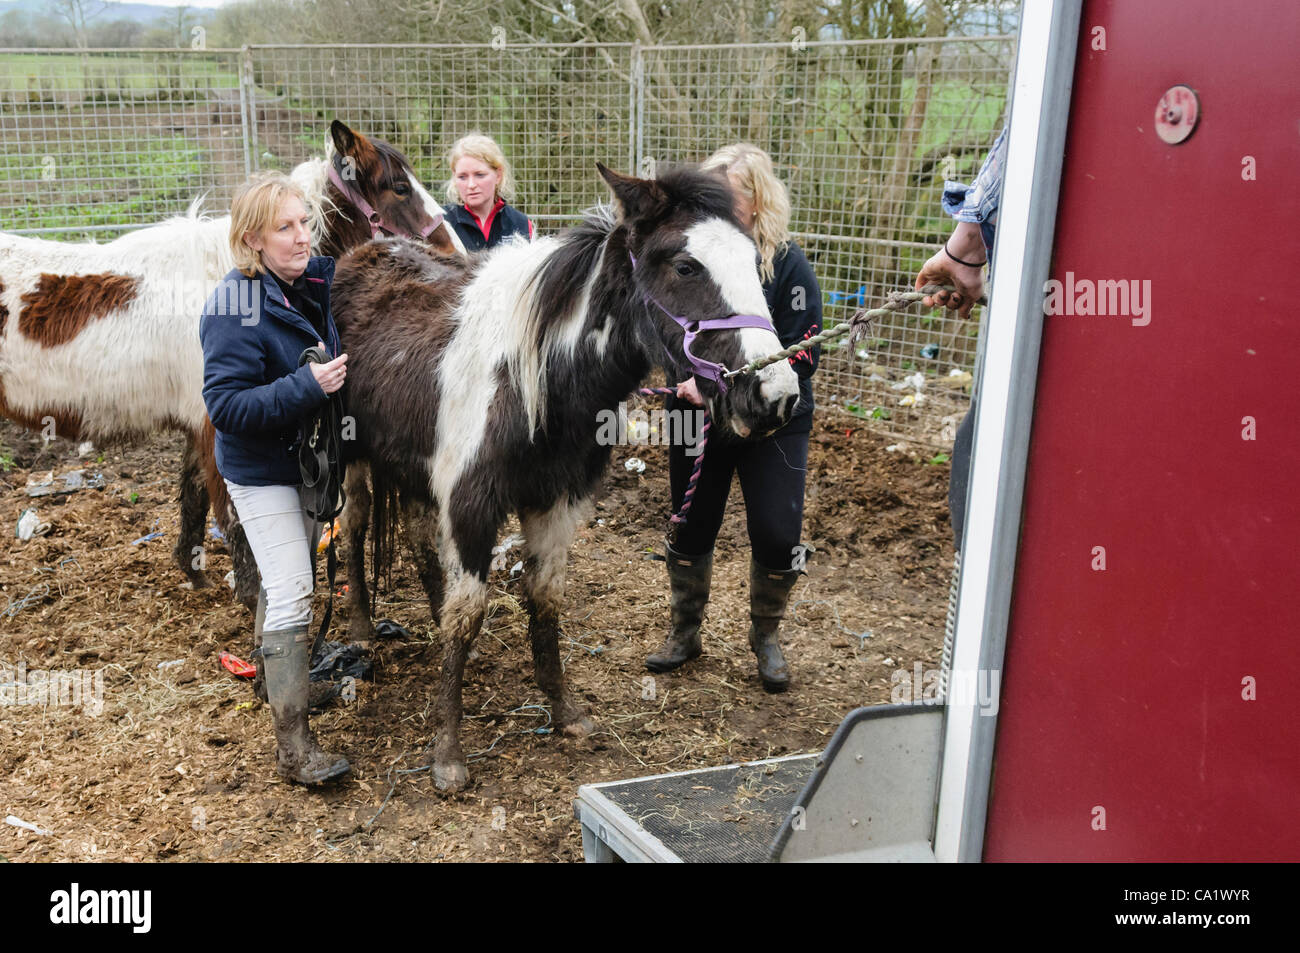 Newtownabbey, Northern Ireland, UK, 21/03/2012 - Lyn Friel, and other volunteers from Crosskennan Lane Animal Sanctuary round up surviving horses and try to get them into a horse box, as dead and malnourished horses found in Newtownabbey Stock Photo